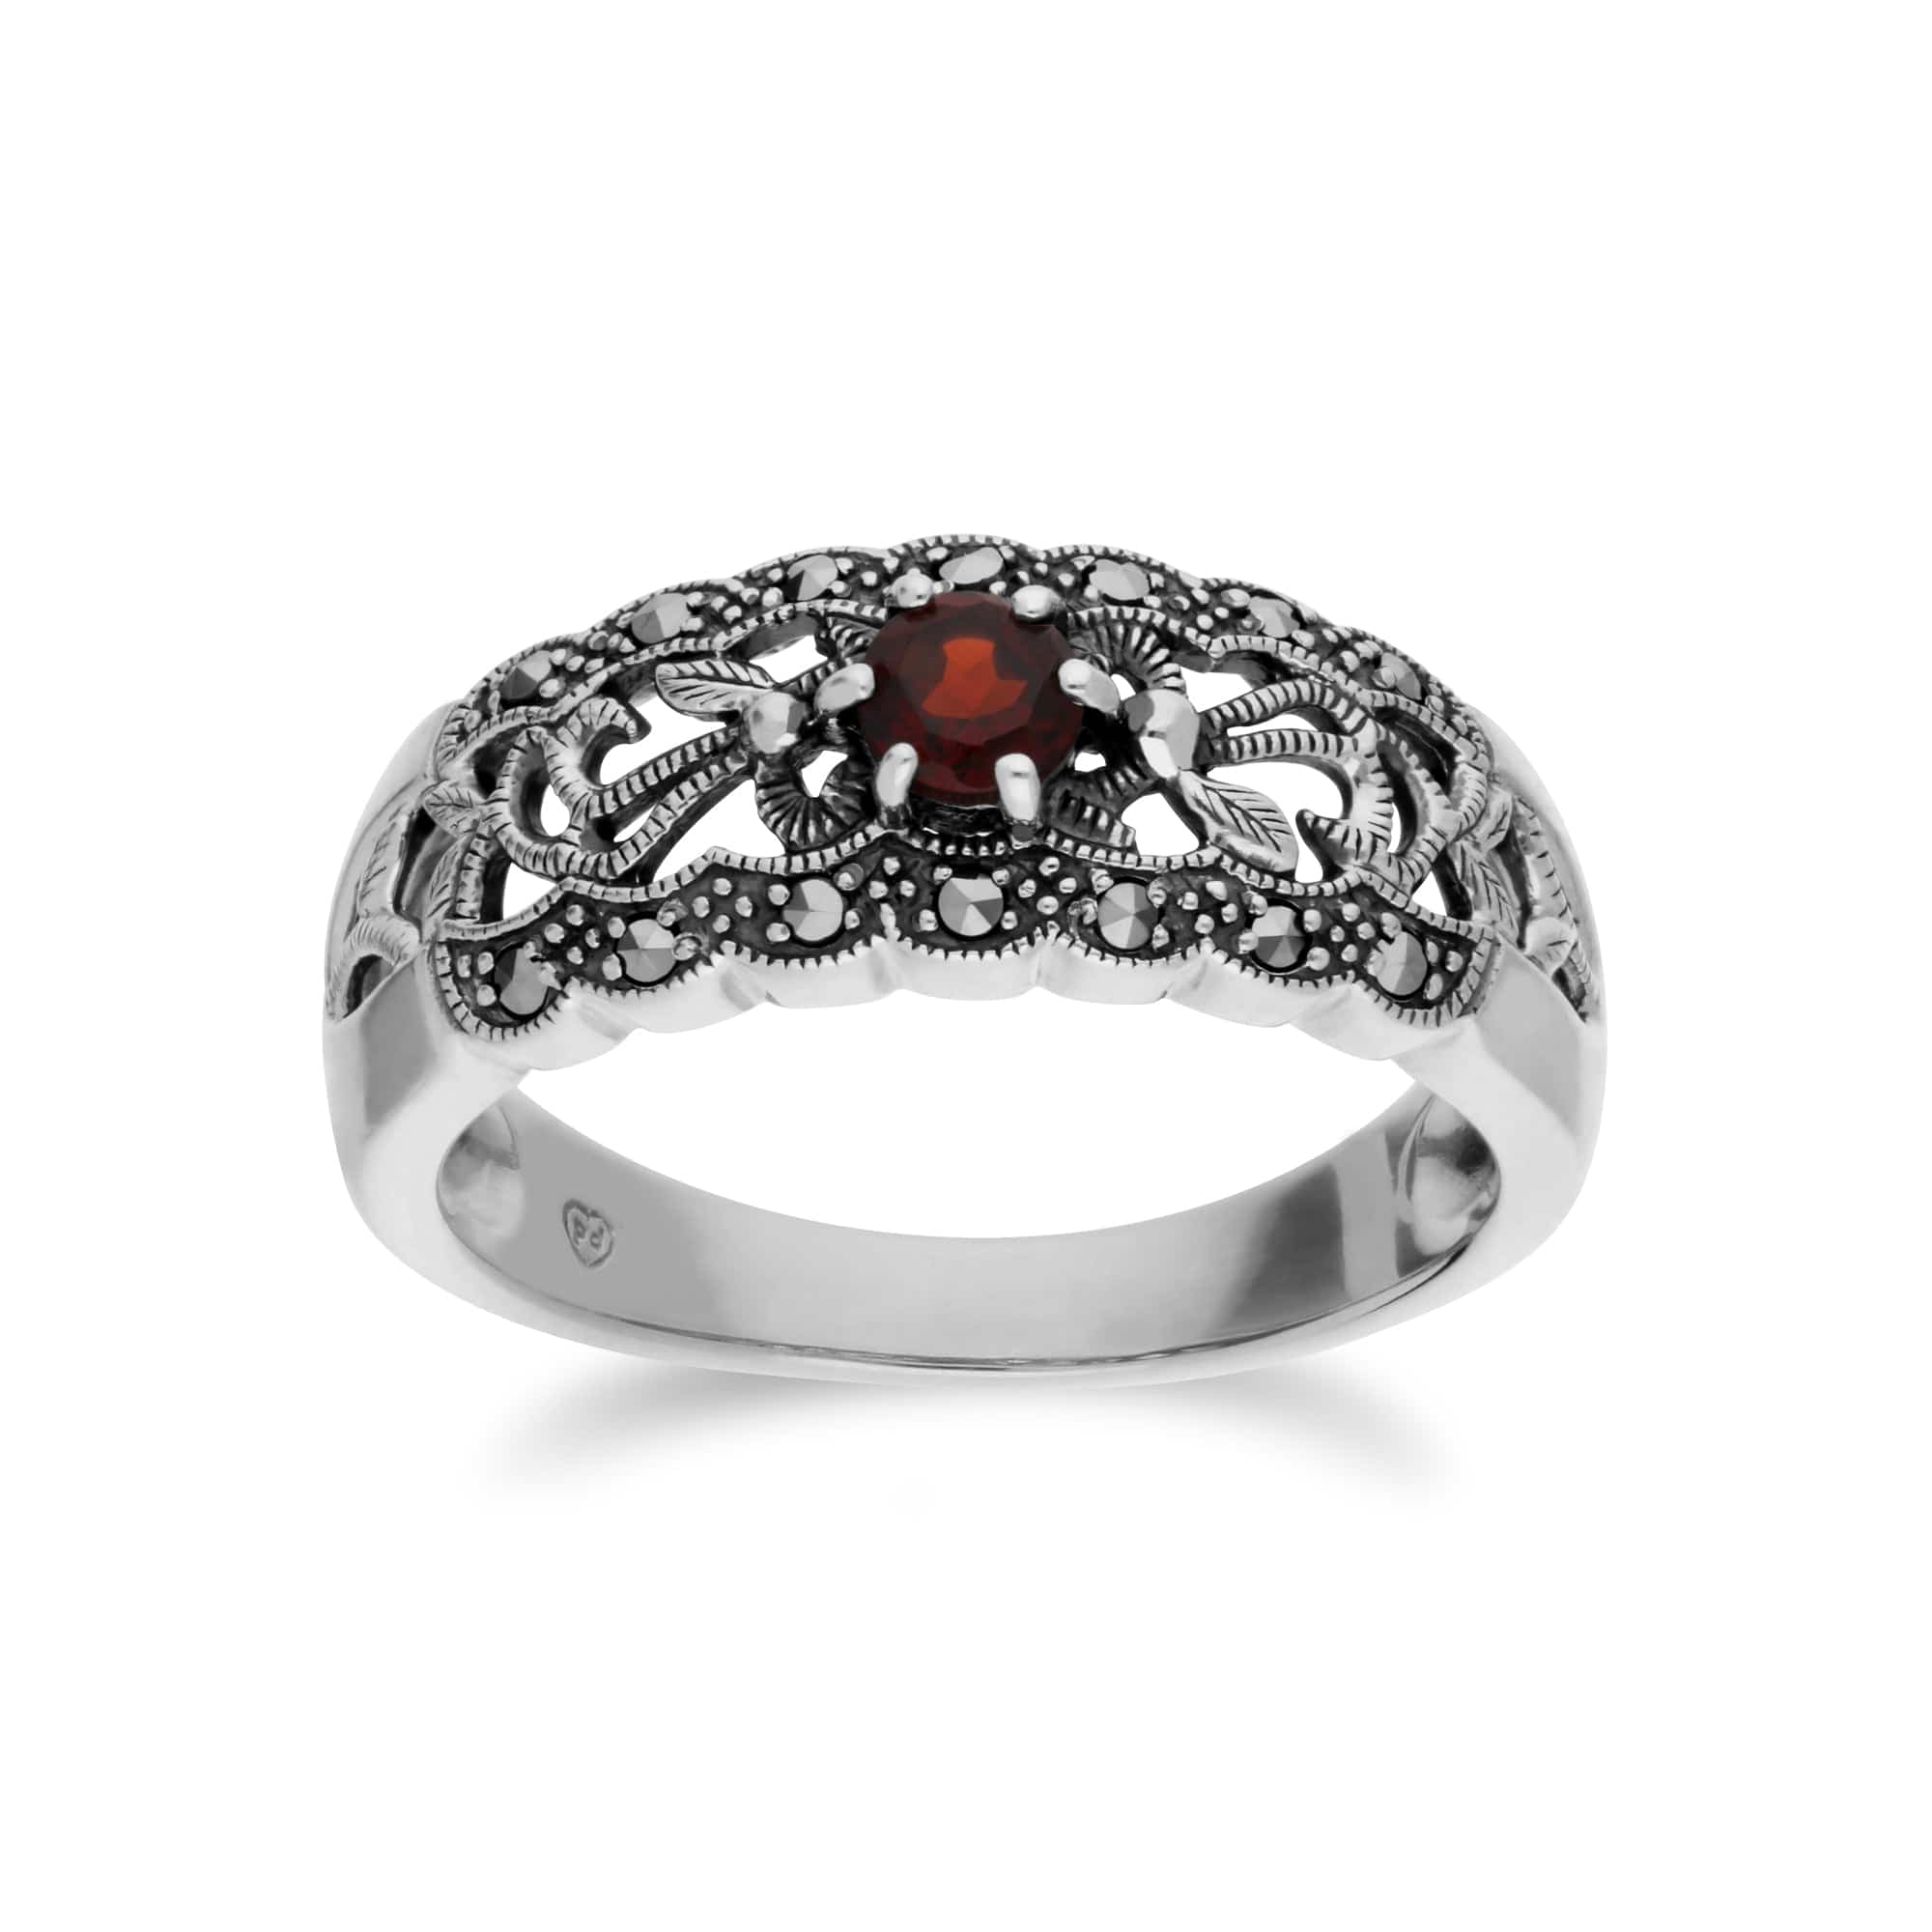 Art Nouveau Style Round Garnet & Marcasite Floral Band Ring in 925 Sterling Silver - Gemondo